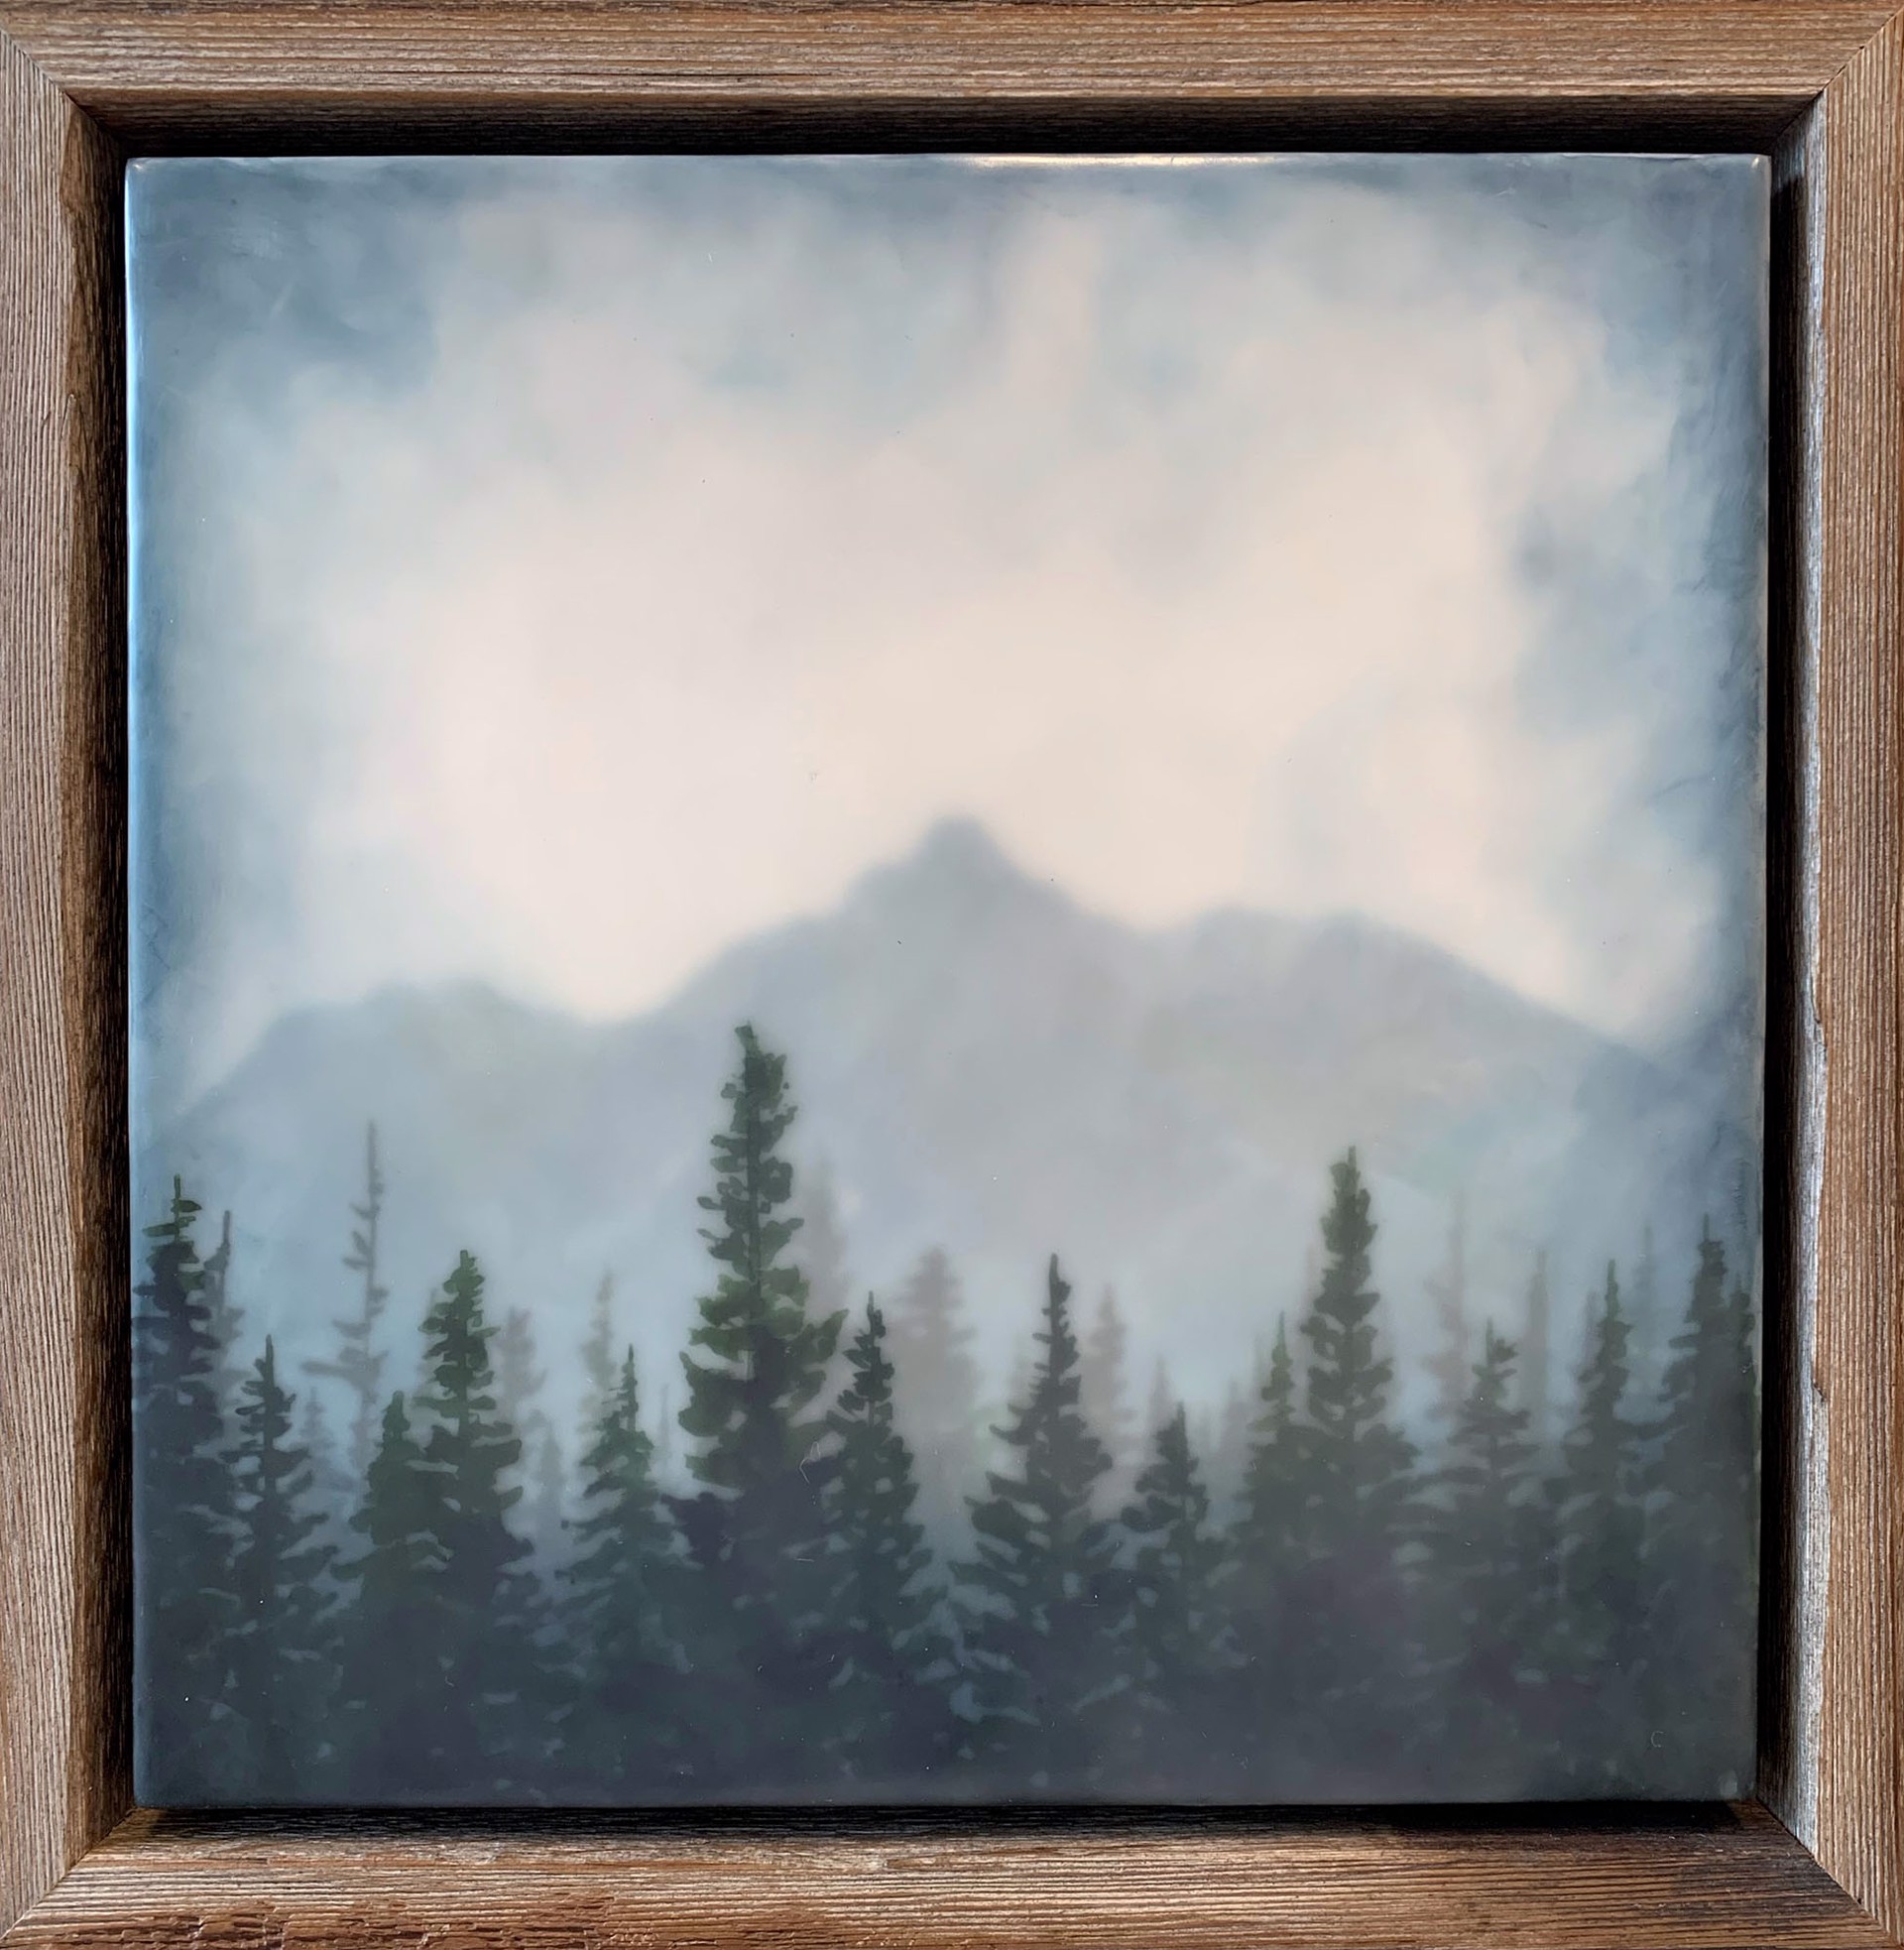 A Contemporary Fine Art Painting By Bridgette Meinhold Featuring Green Trees and Mountains, Available At Gallery Wild